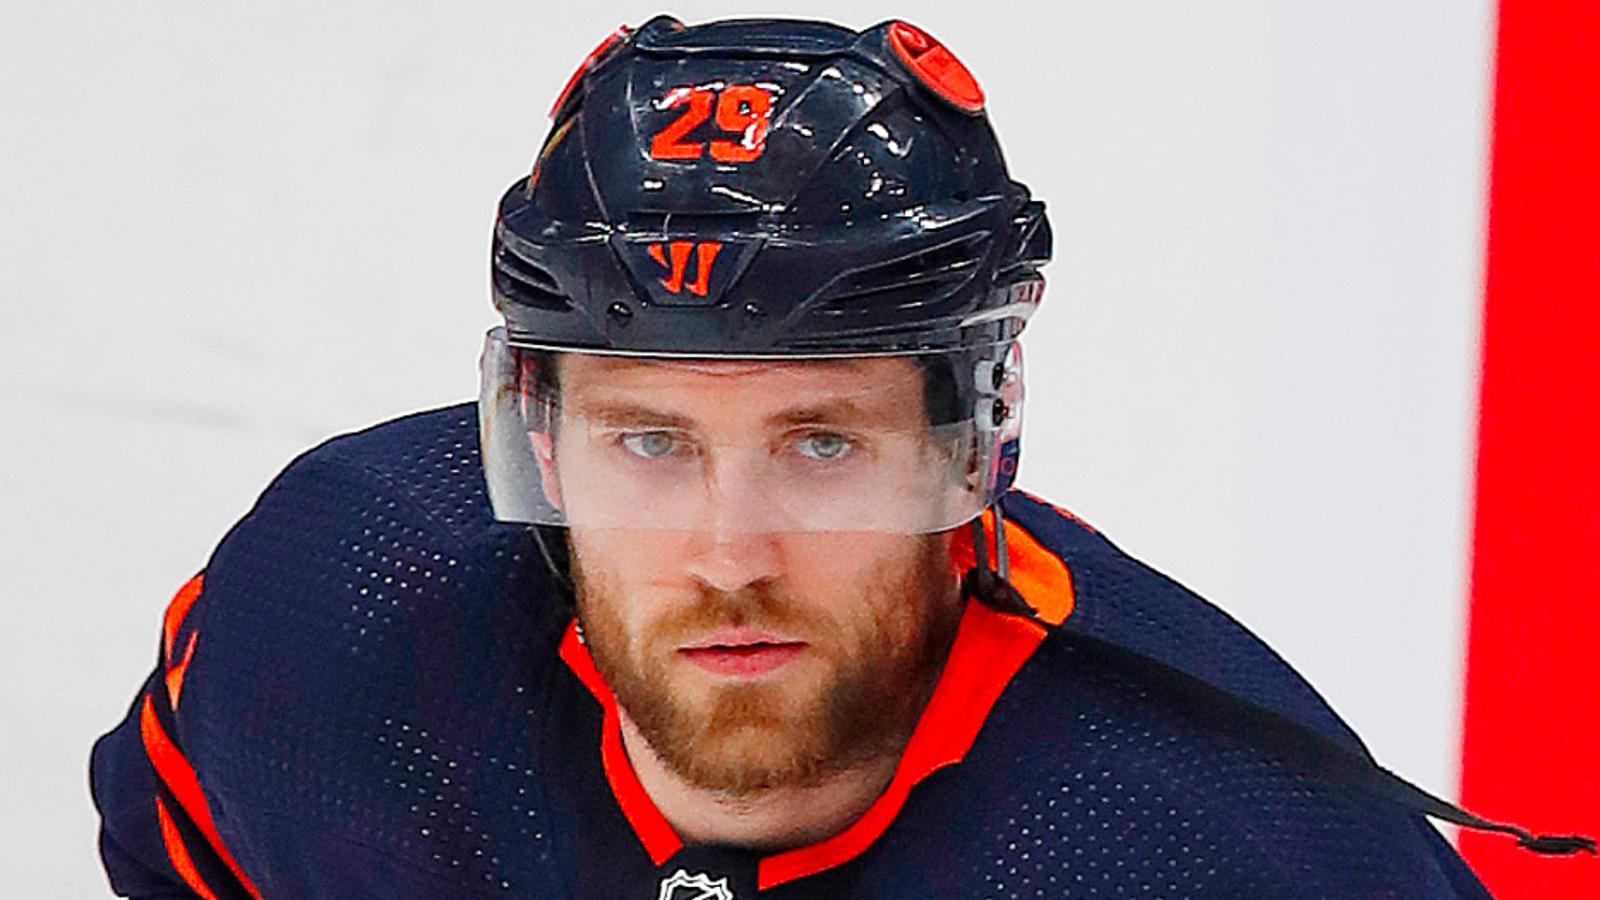 Report: NHL Player Safety is aware that Flames are targeting Draisaitl's ankle 